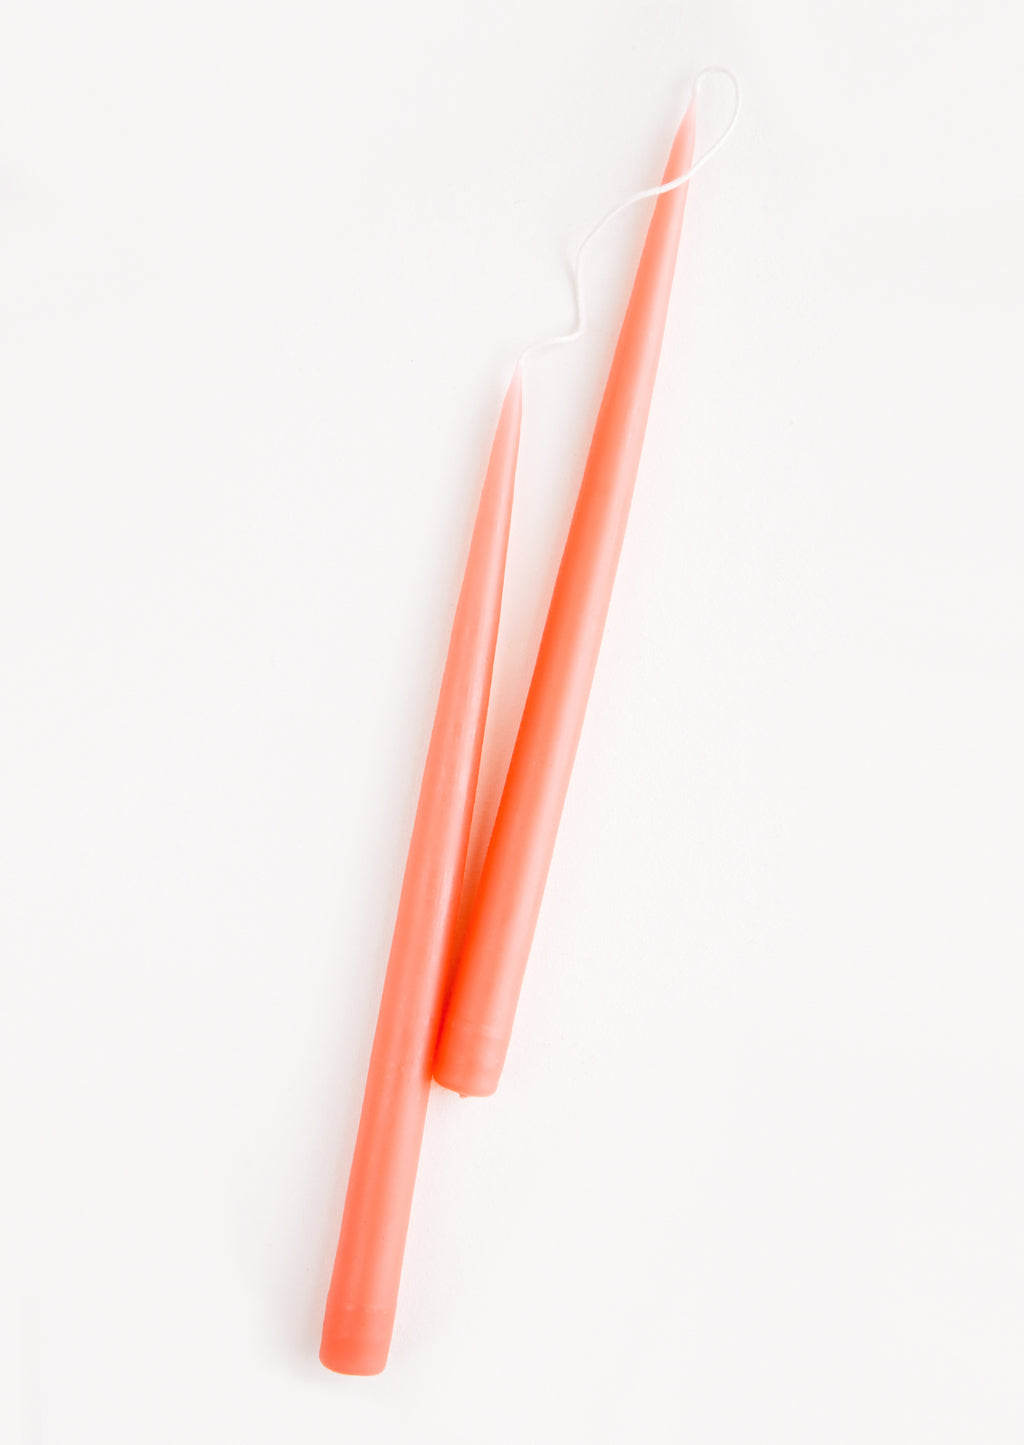 Coral: Pair of Two taper Candles in coral peach.